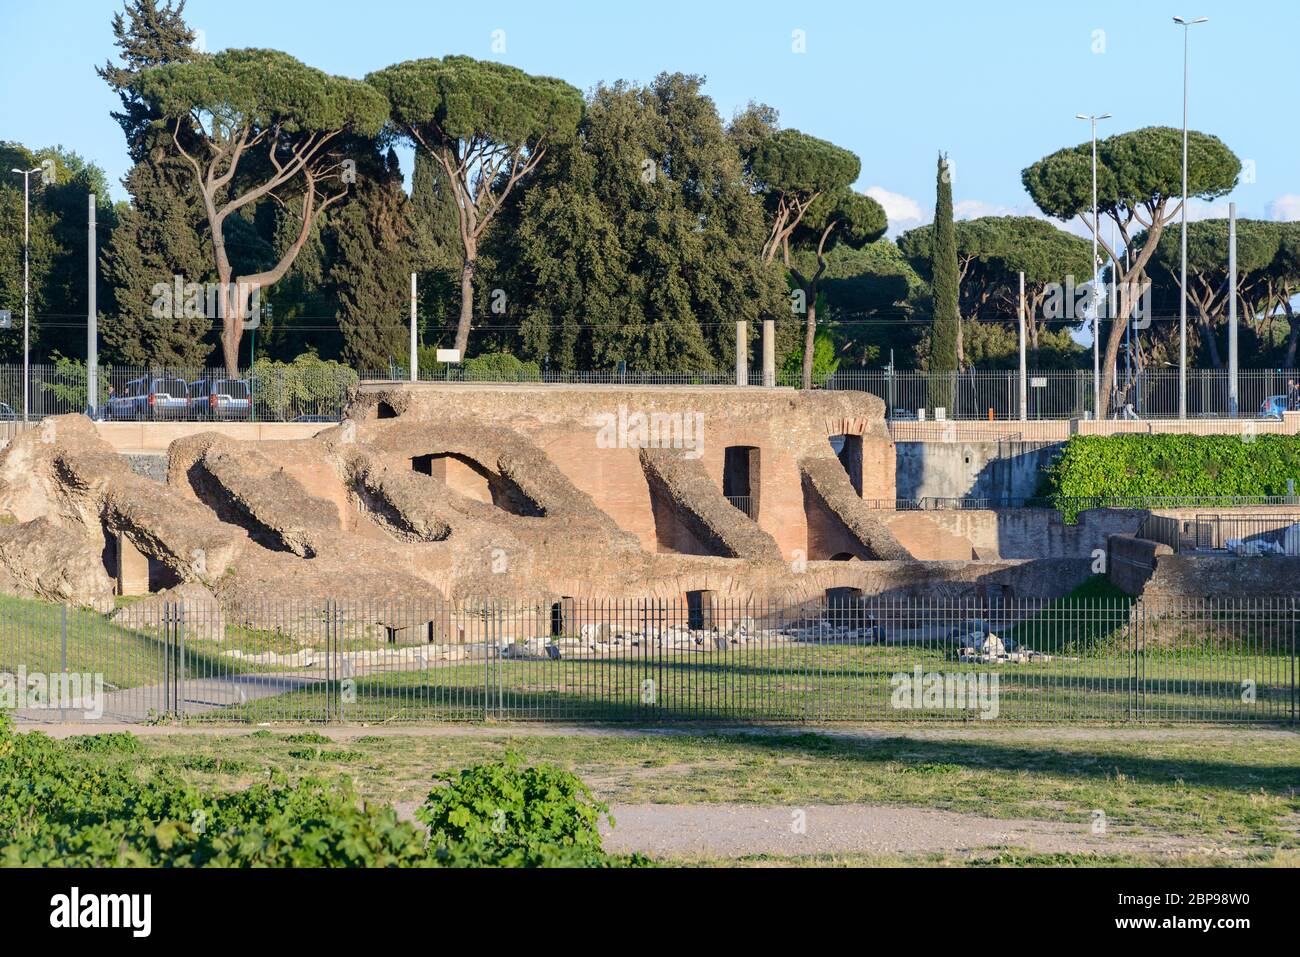 The Circus Maximus ruins, in Italian Circo Massimo,  an ancient Roman chariot racing stadium and mass entertainment venue located in Rome, Italy Stock Photo